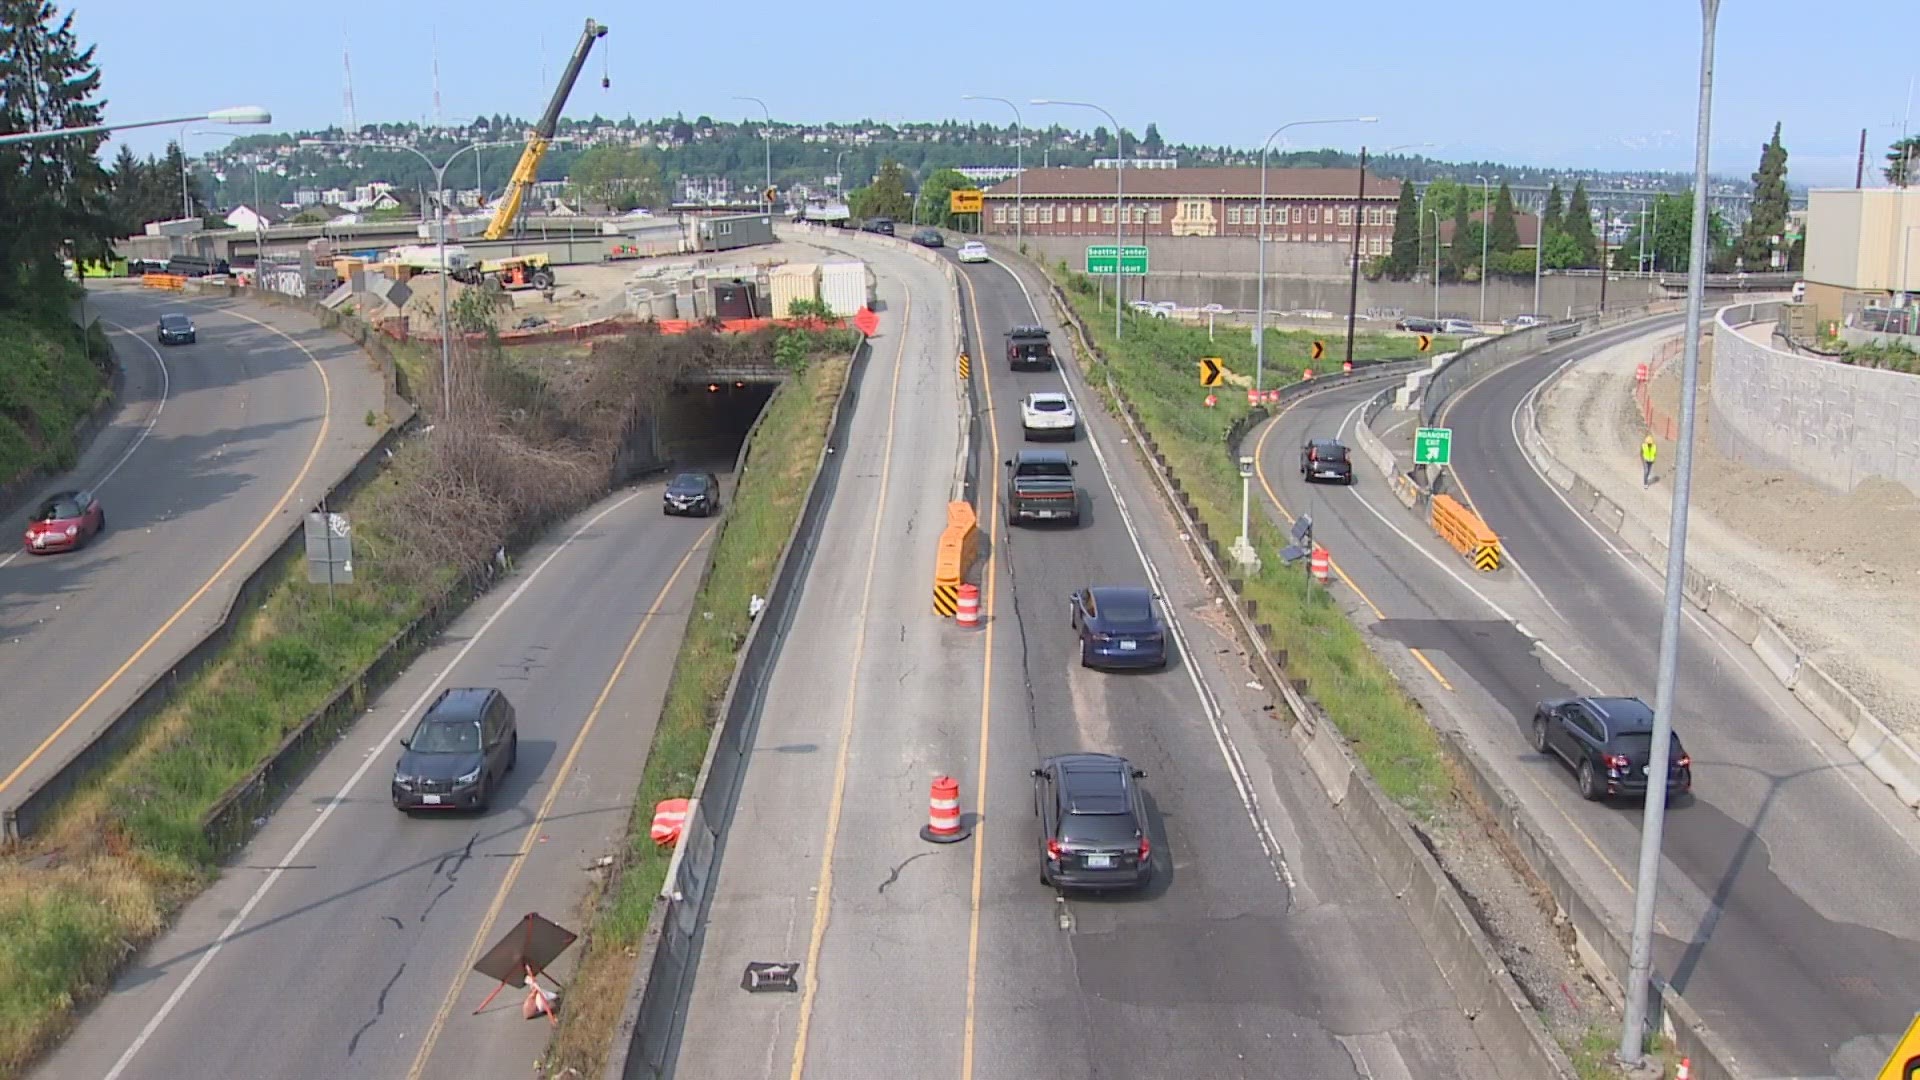 Travelers using northbound Interstate 5 through downtown Seattle should plan for delays this weekend.